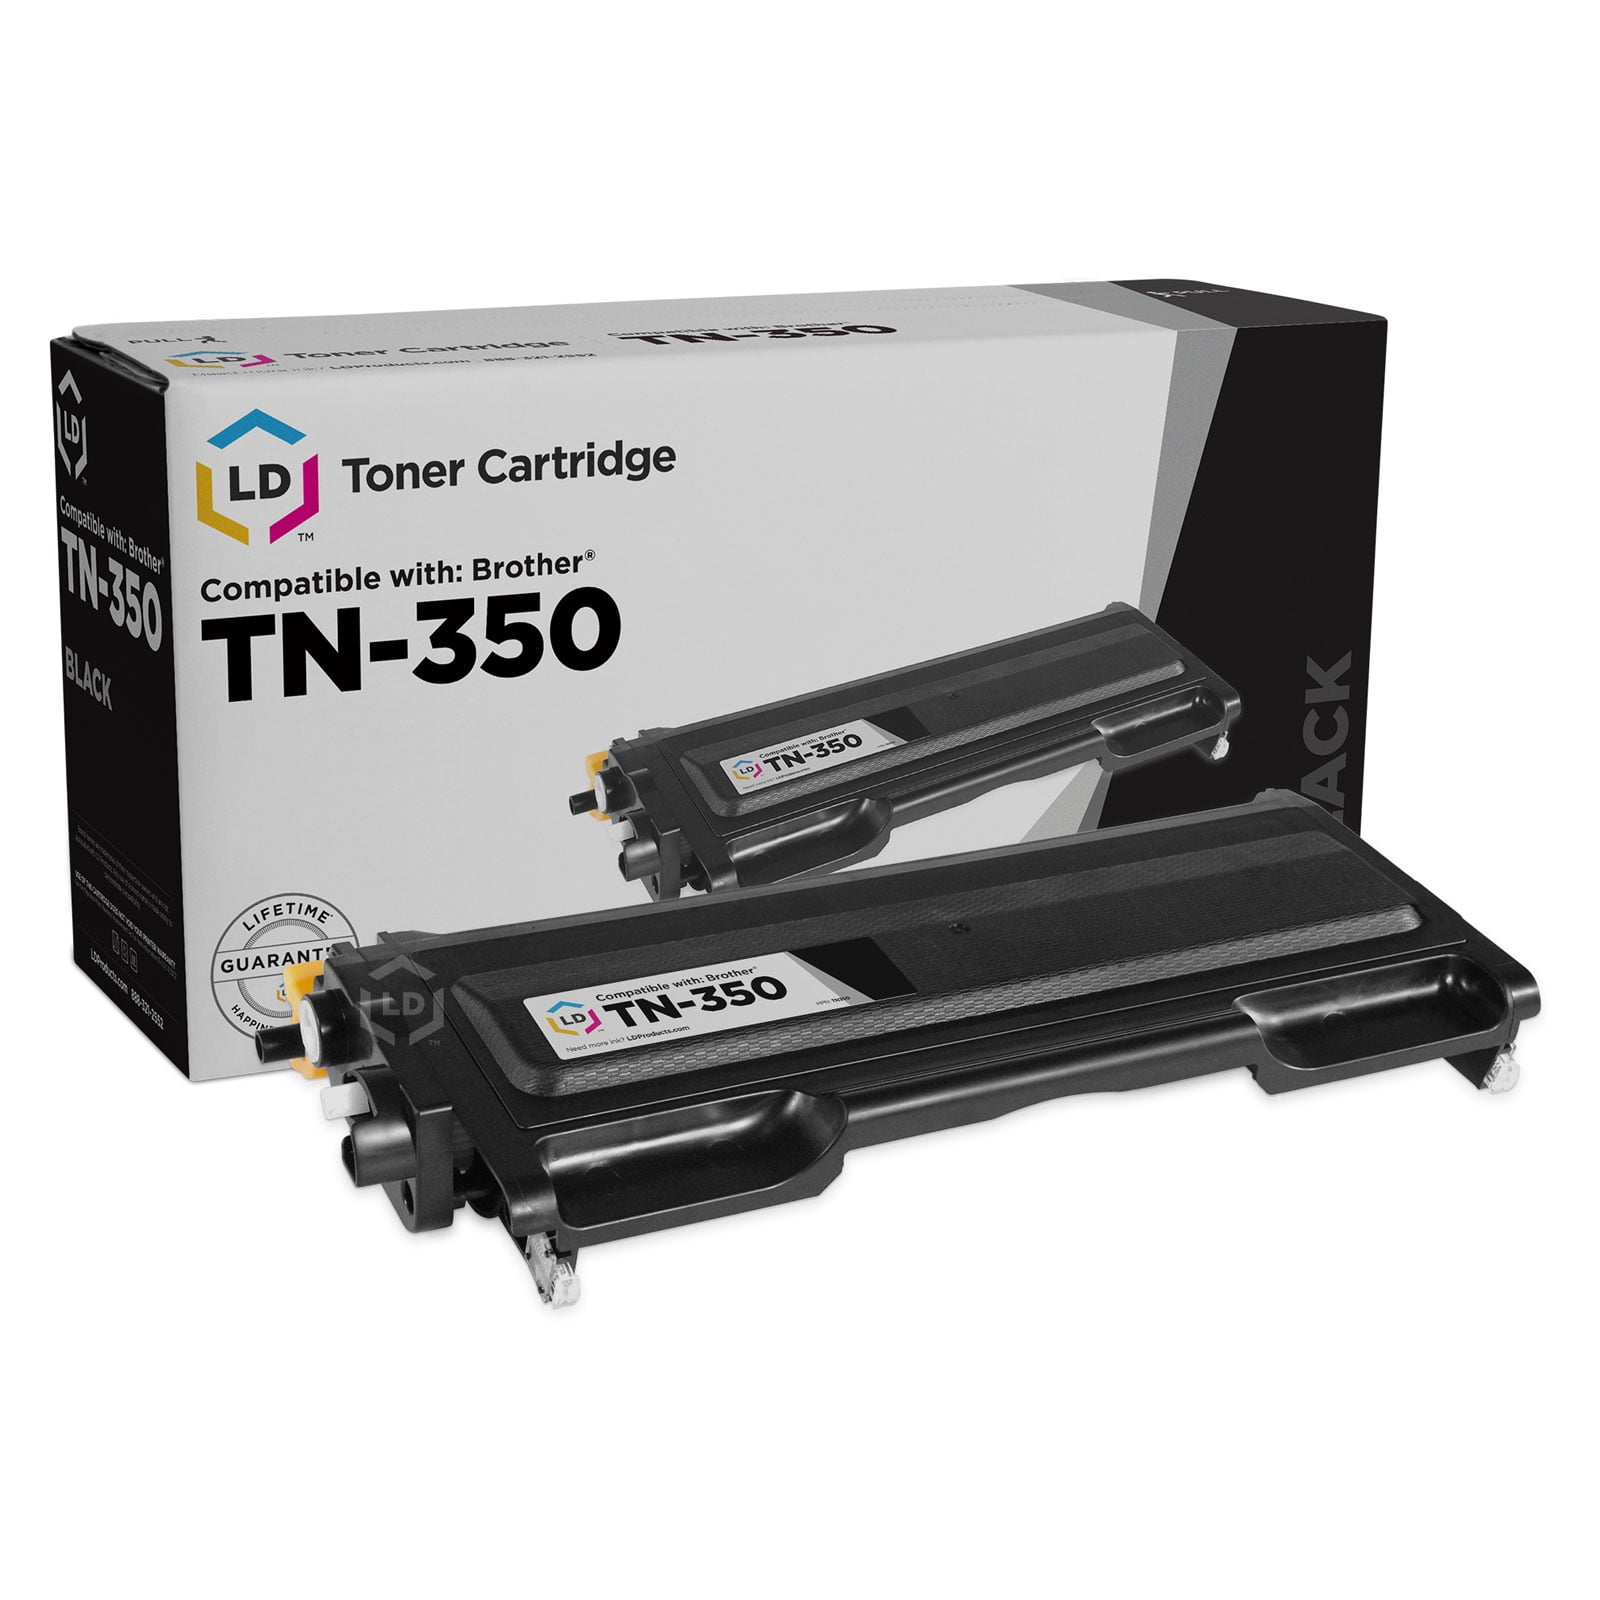 LD Compatible Replacement for TN350 Black Toner for use in DCP-7010, DCP-7020, DCP-7025, HL-2030, HL-2040, HL-2070, Intellifax 2820, 2920 & MFC-7220, MFC-7420, MFC-7820D Walmart.com